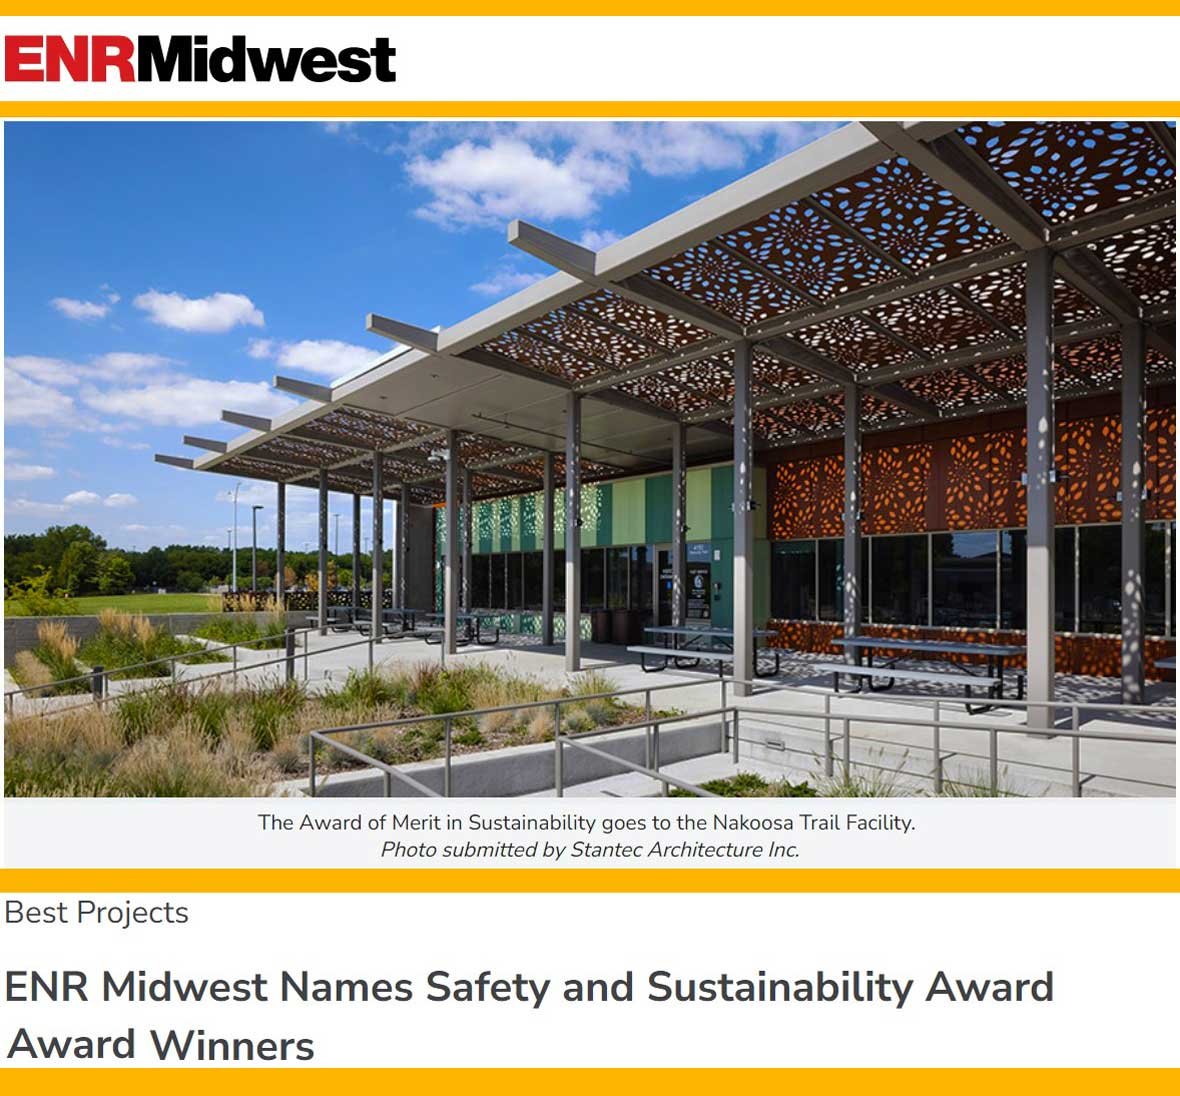 Nakoosa Trail Fleet Fire Radio Shop Facility Construction Manager City Government Project Municipal Building Contractor facade photo for ENR Midwest Safety Sustainability Award